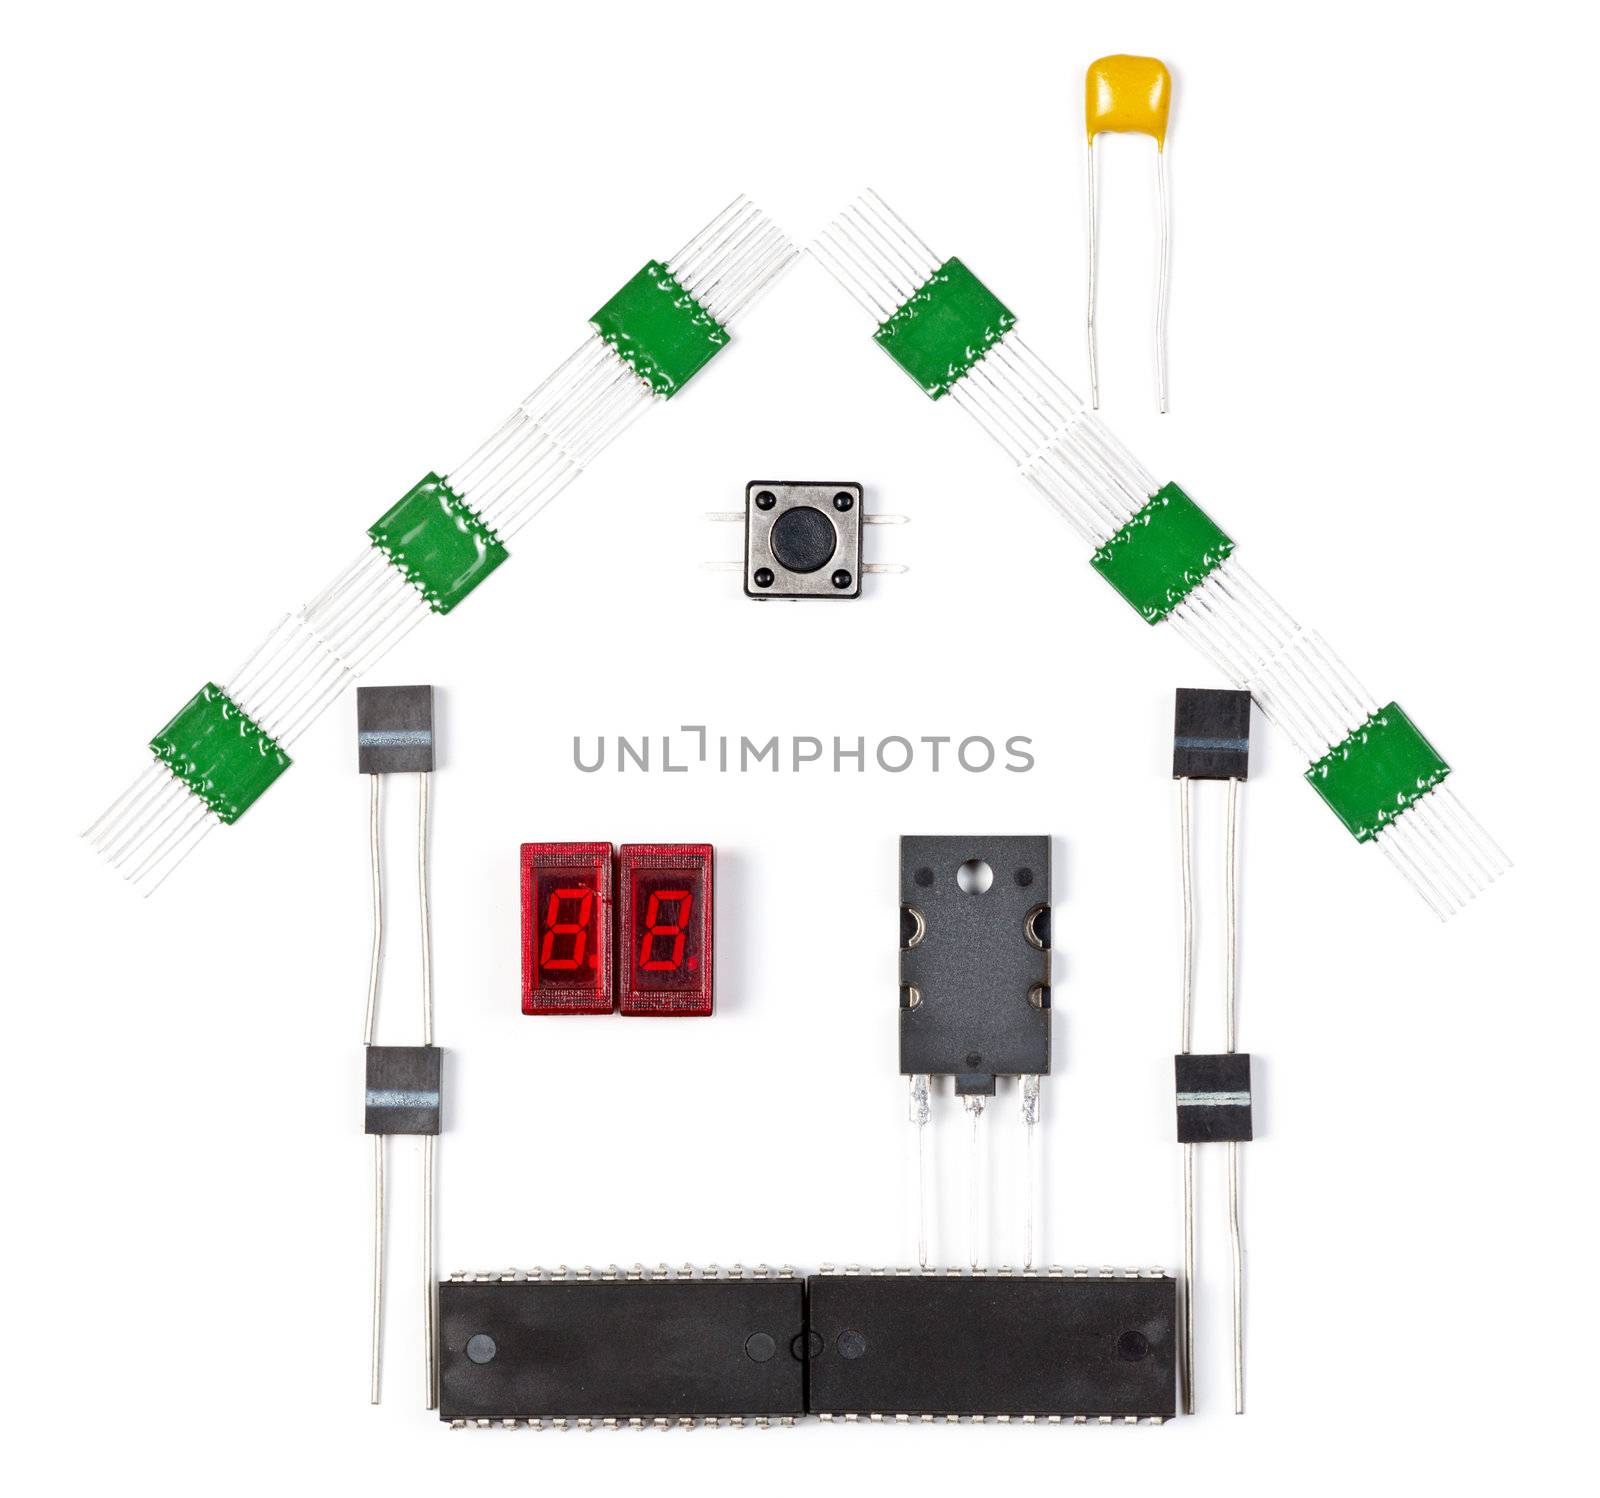 House made of electronic components on white background